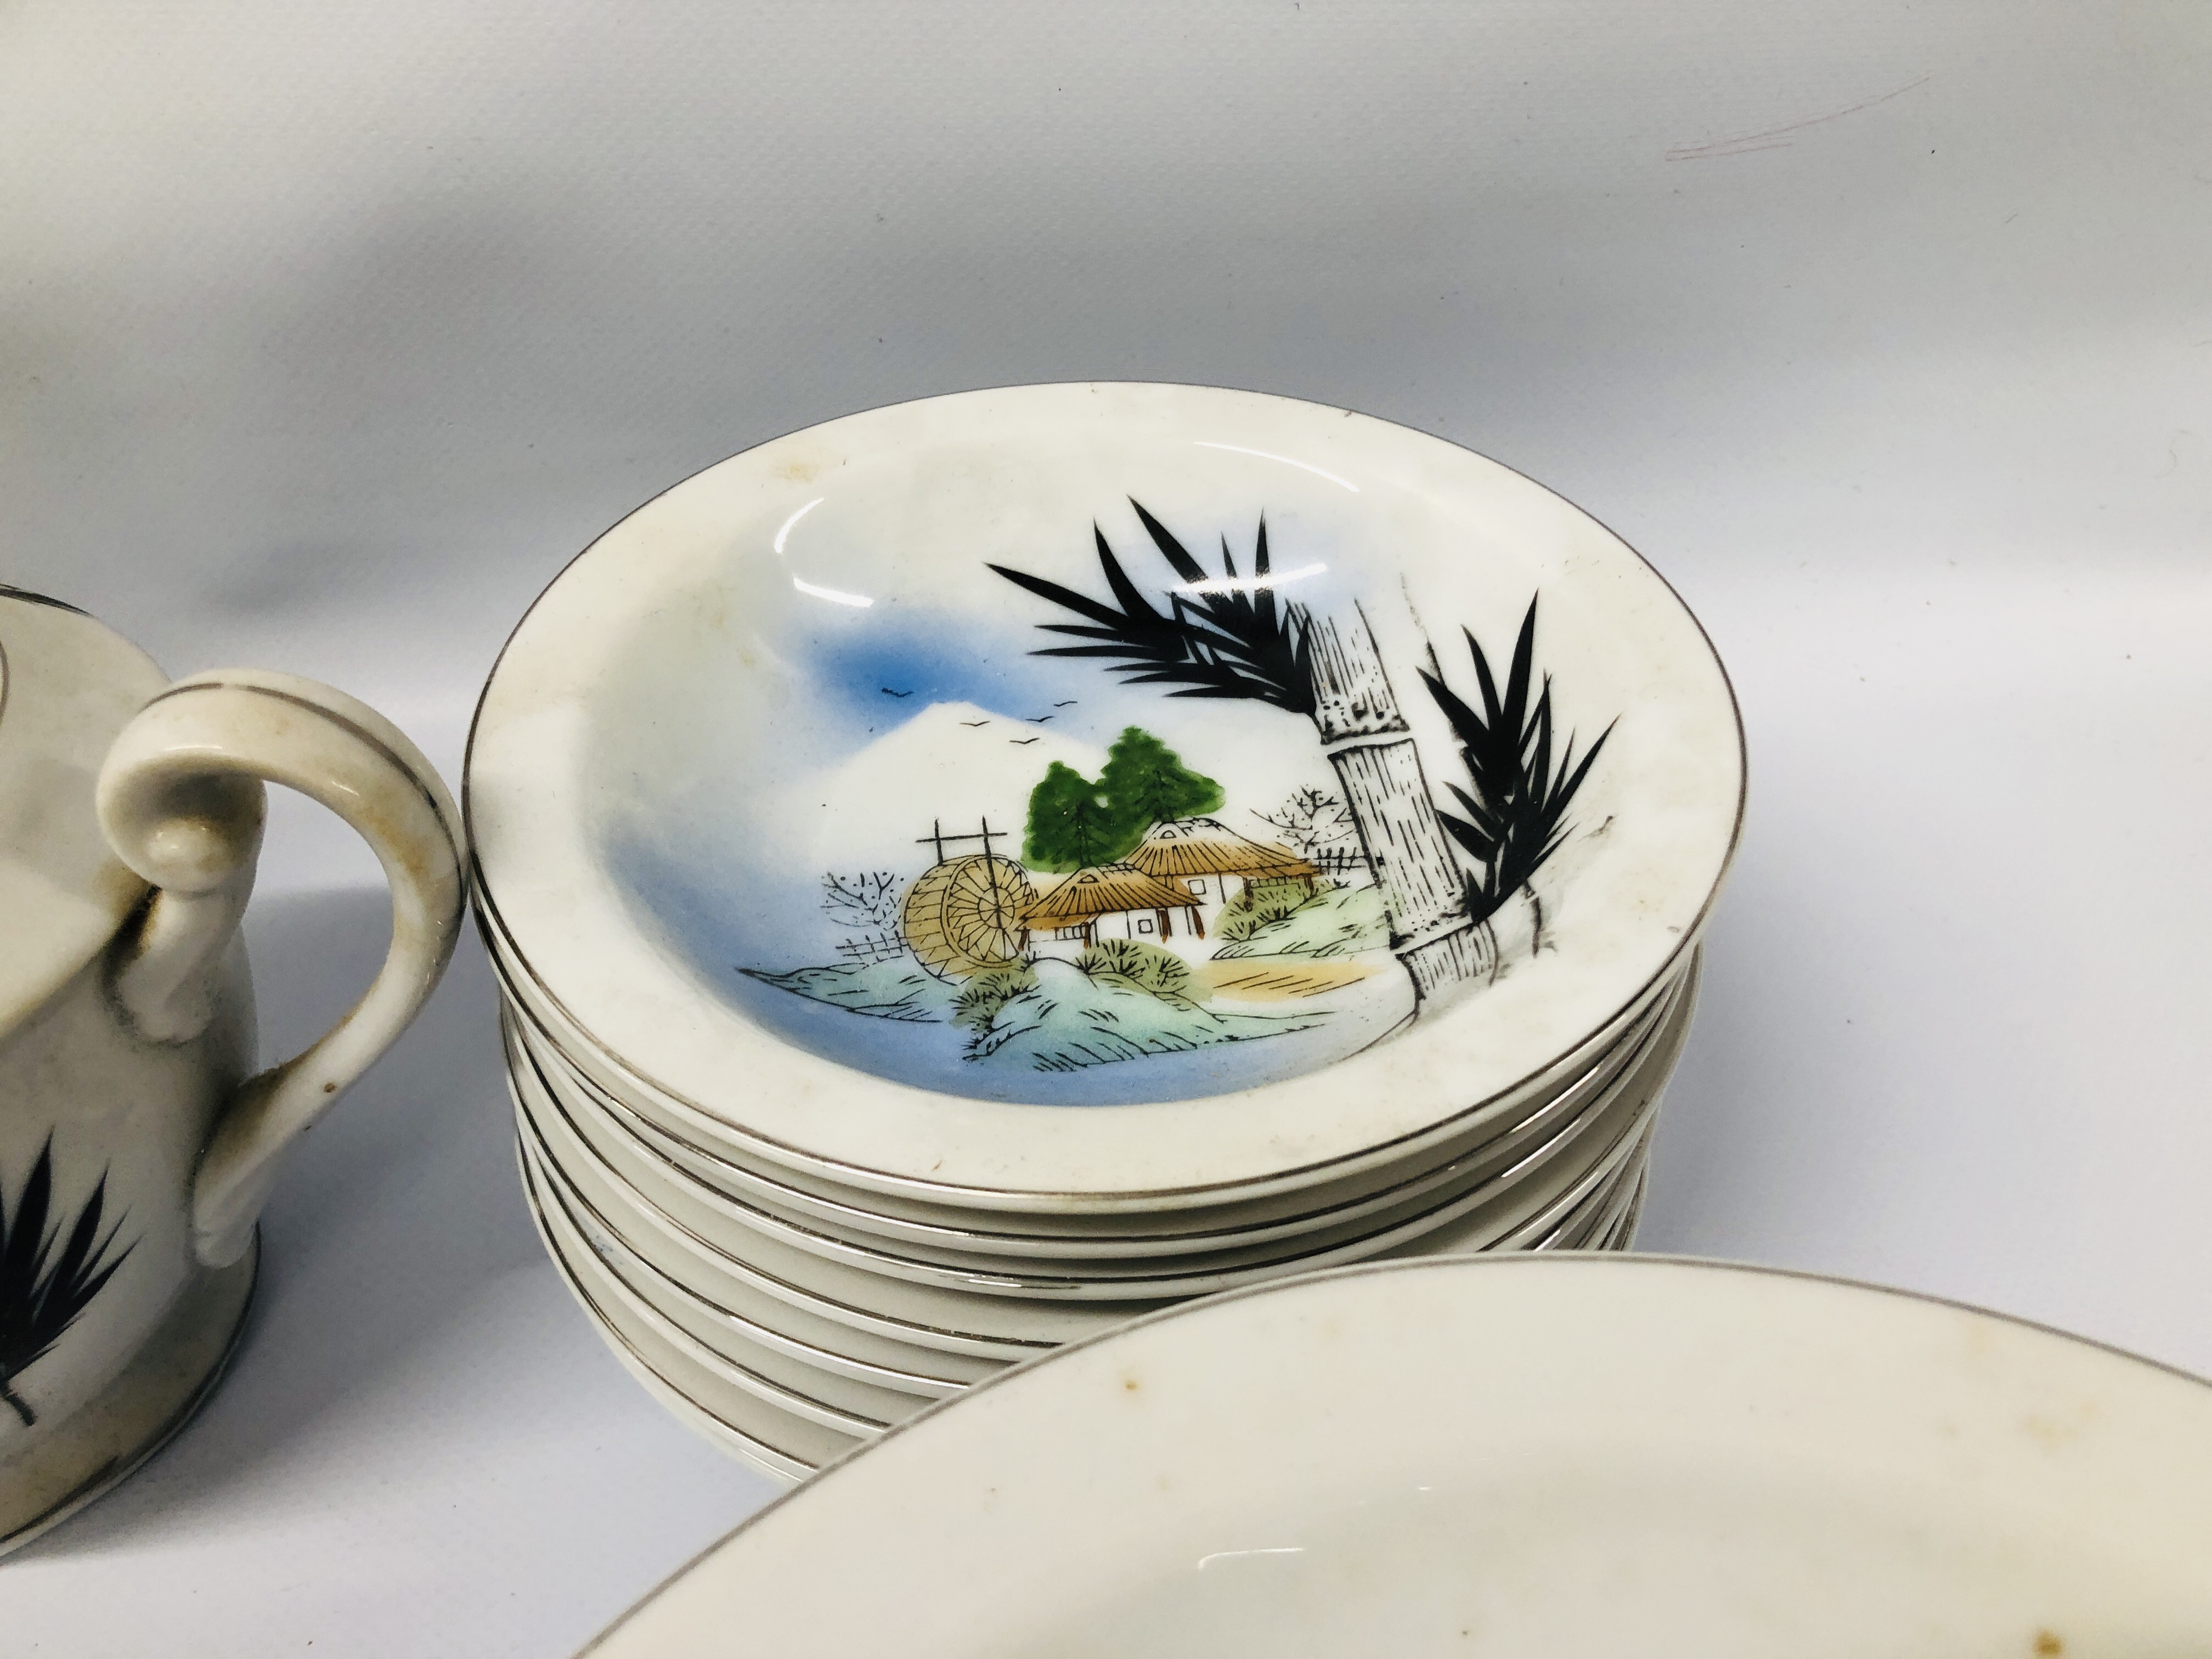 46 PIECES OF E & O CHINA WARE COMPRISING OF PLATES, BOWLS, CUPS AND SAUCERS, SERVING PLATE, - Bild 4 aus 18